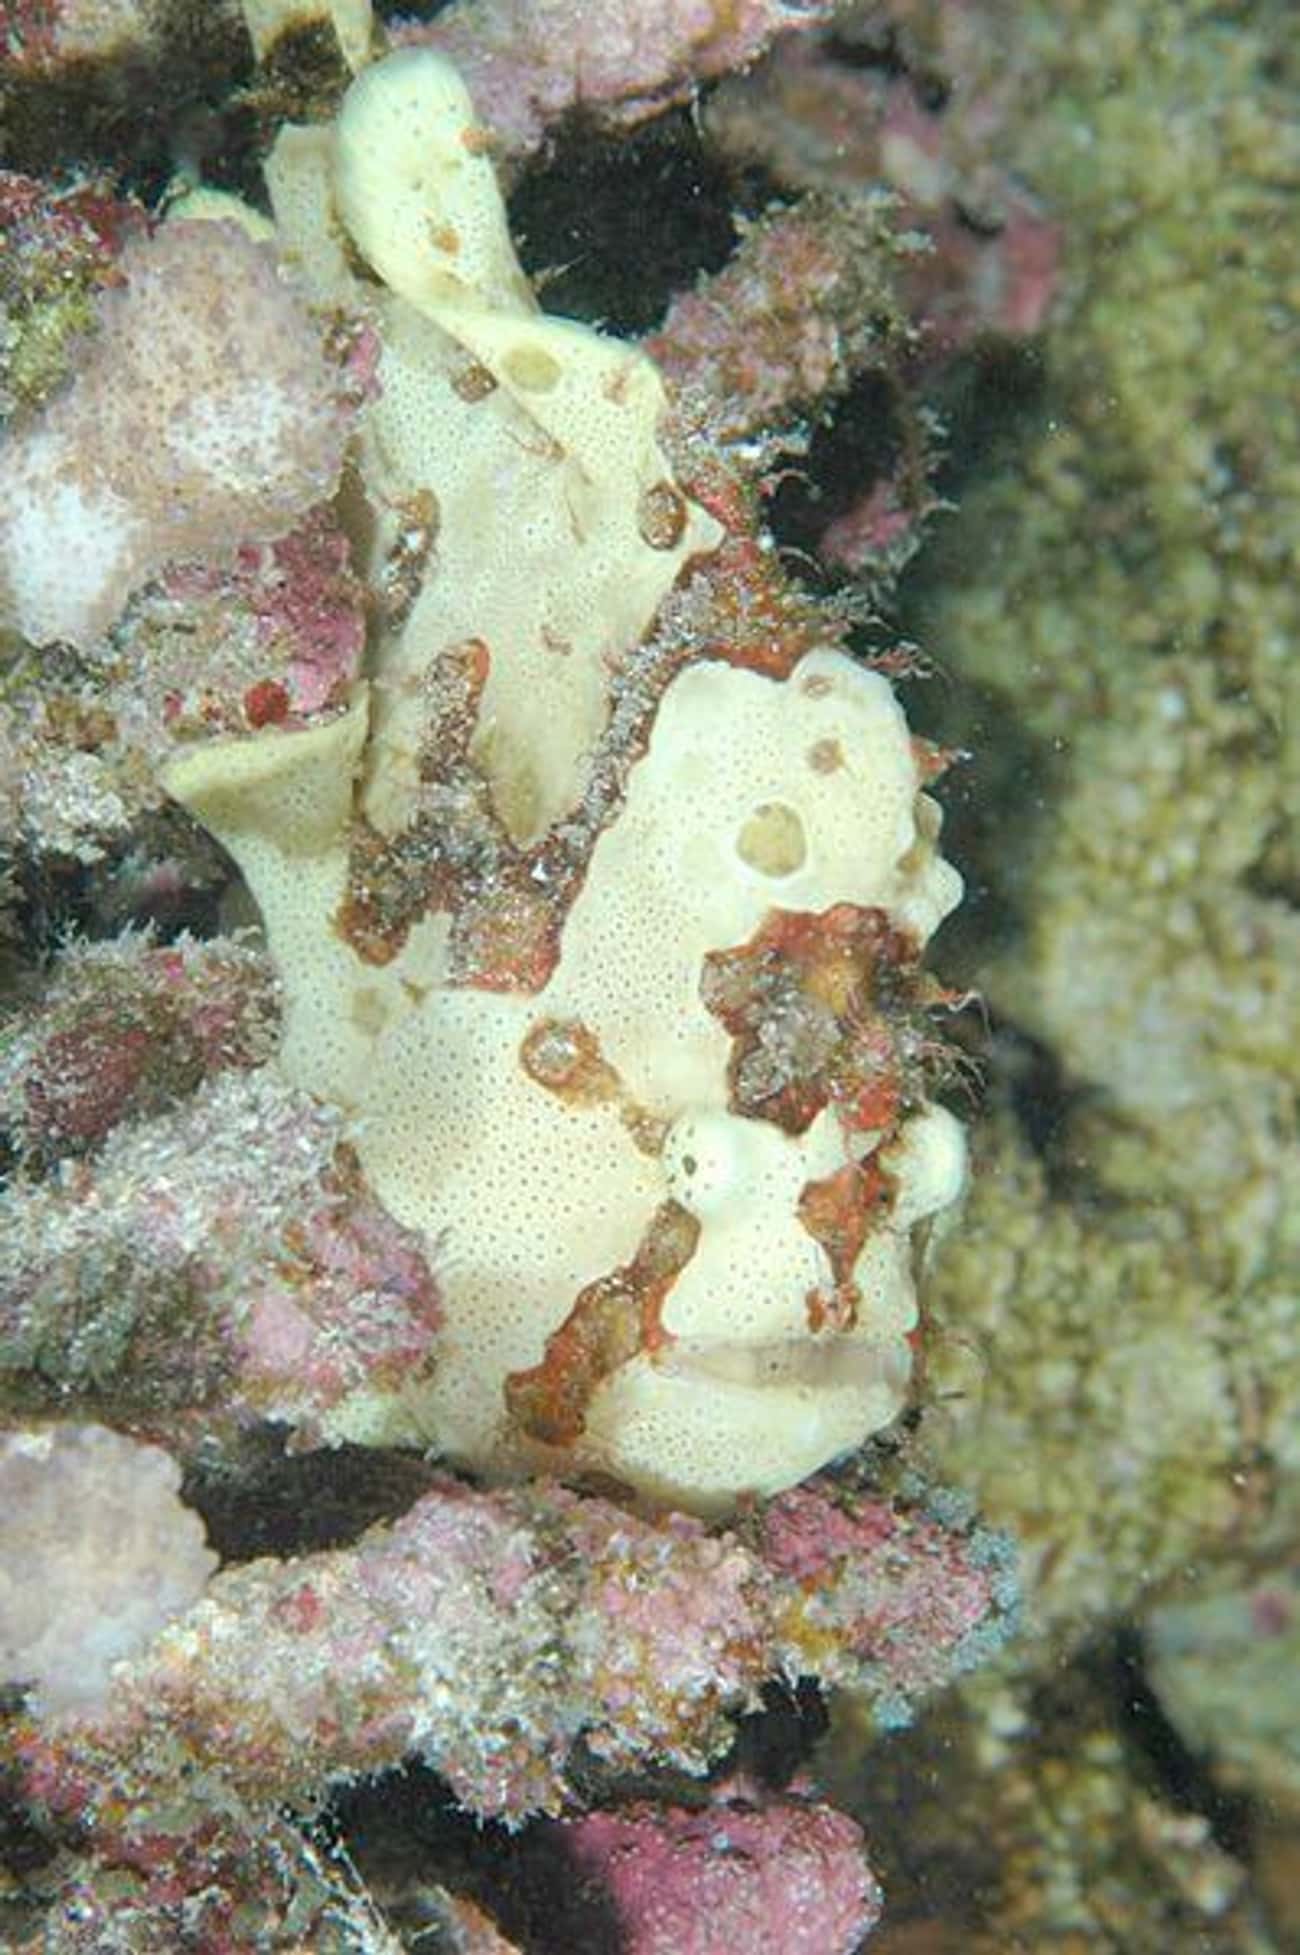 The Frightening Looking Frogfish